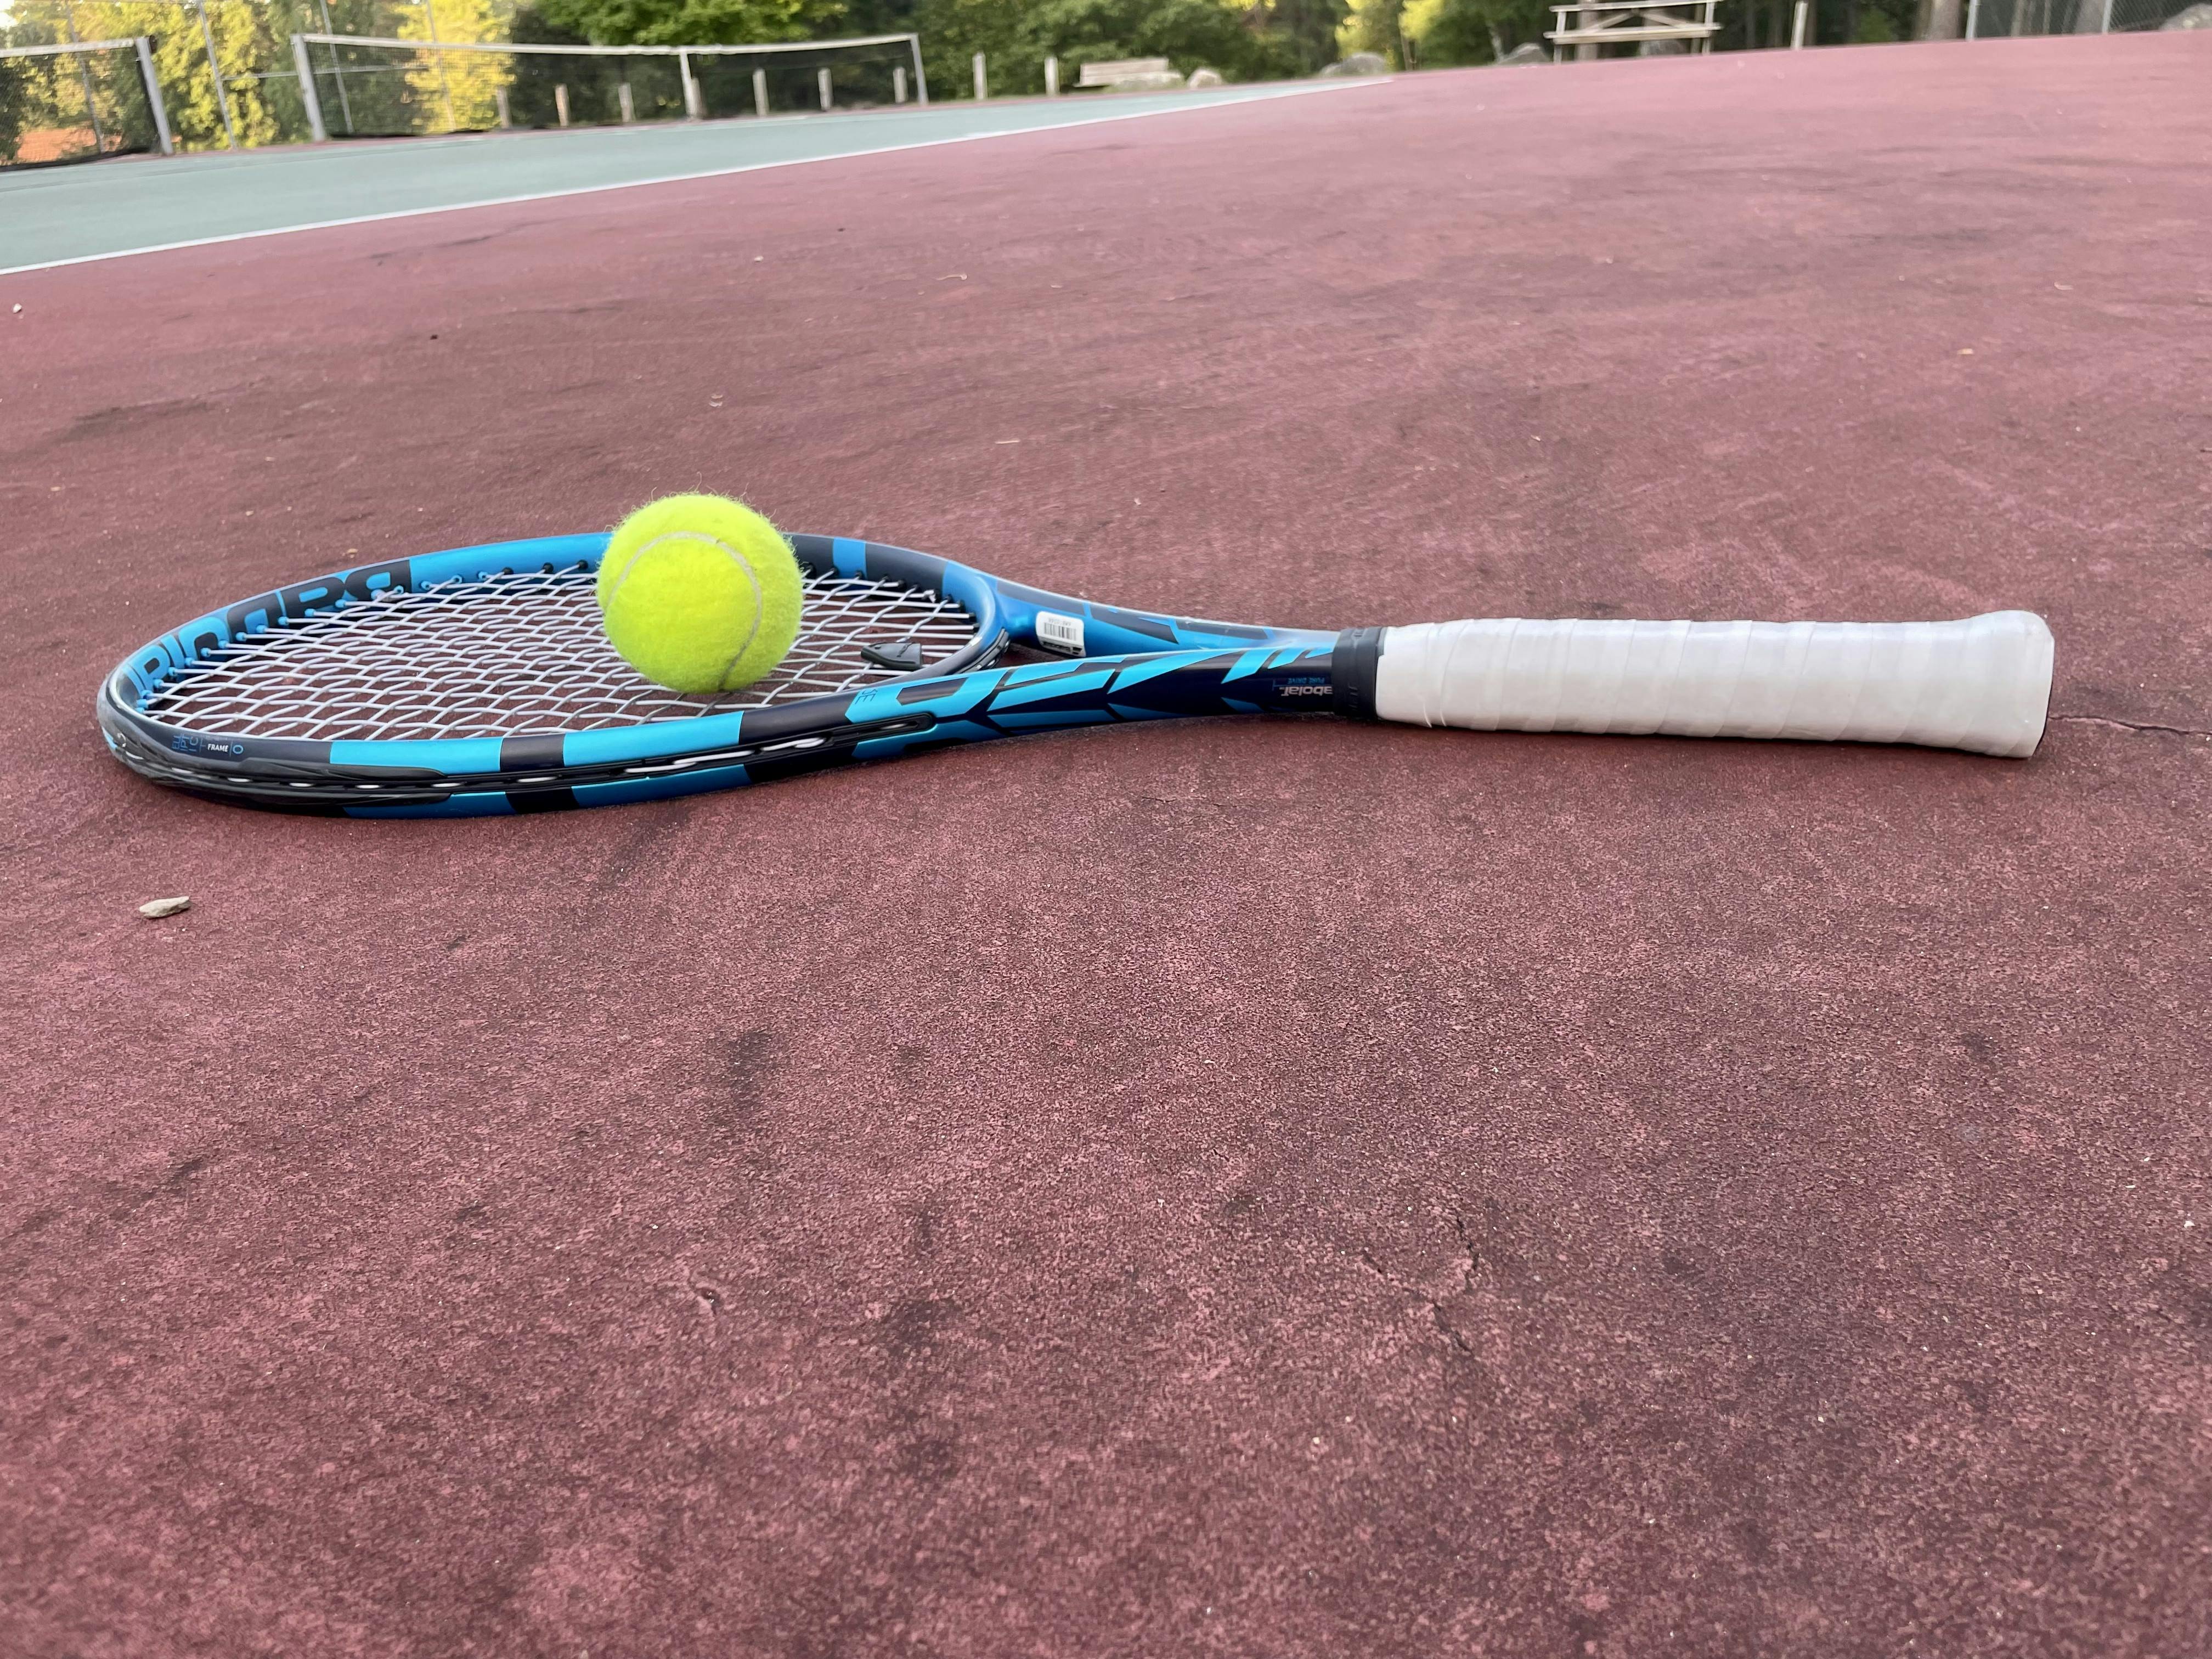 A Babolat Pure Drive 100 2021 lying on a tennis court.